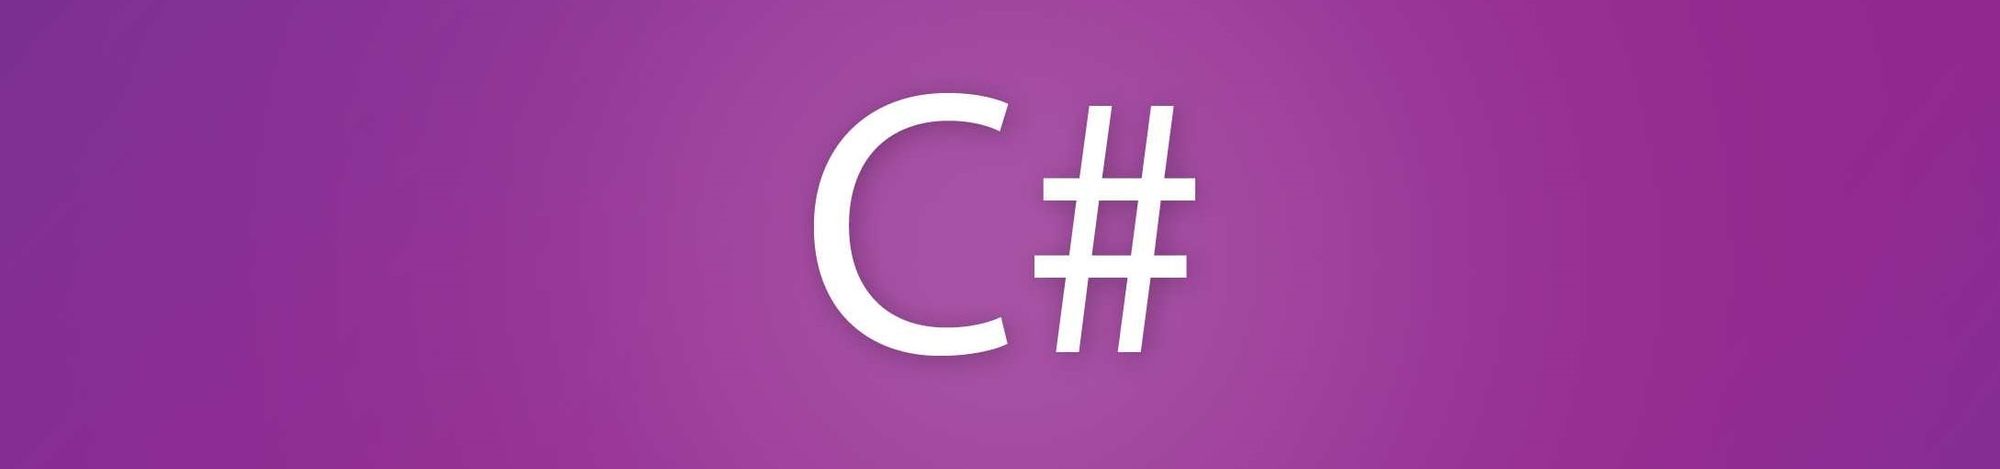 C# - Serilog, how to add or enrich log events with properties